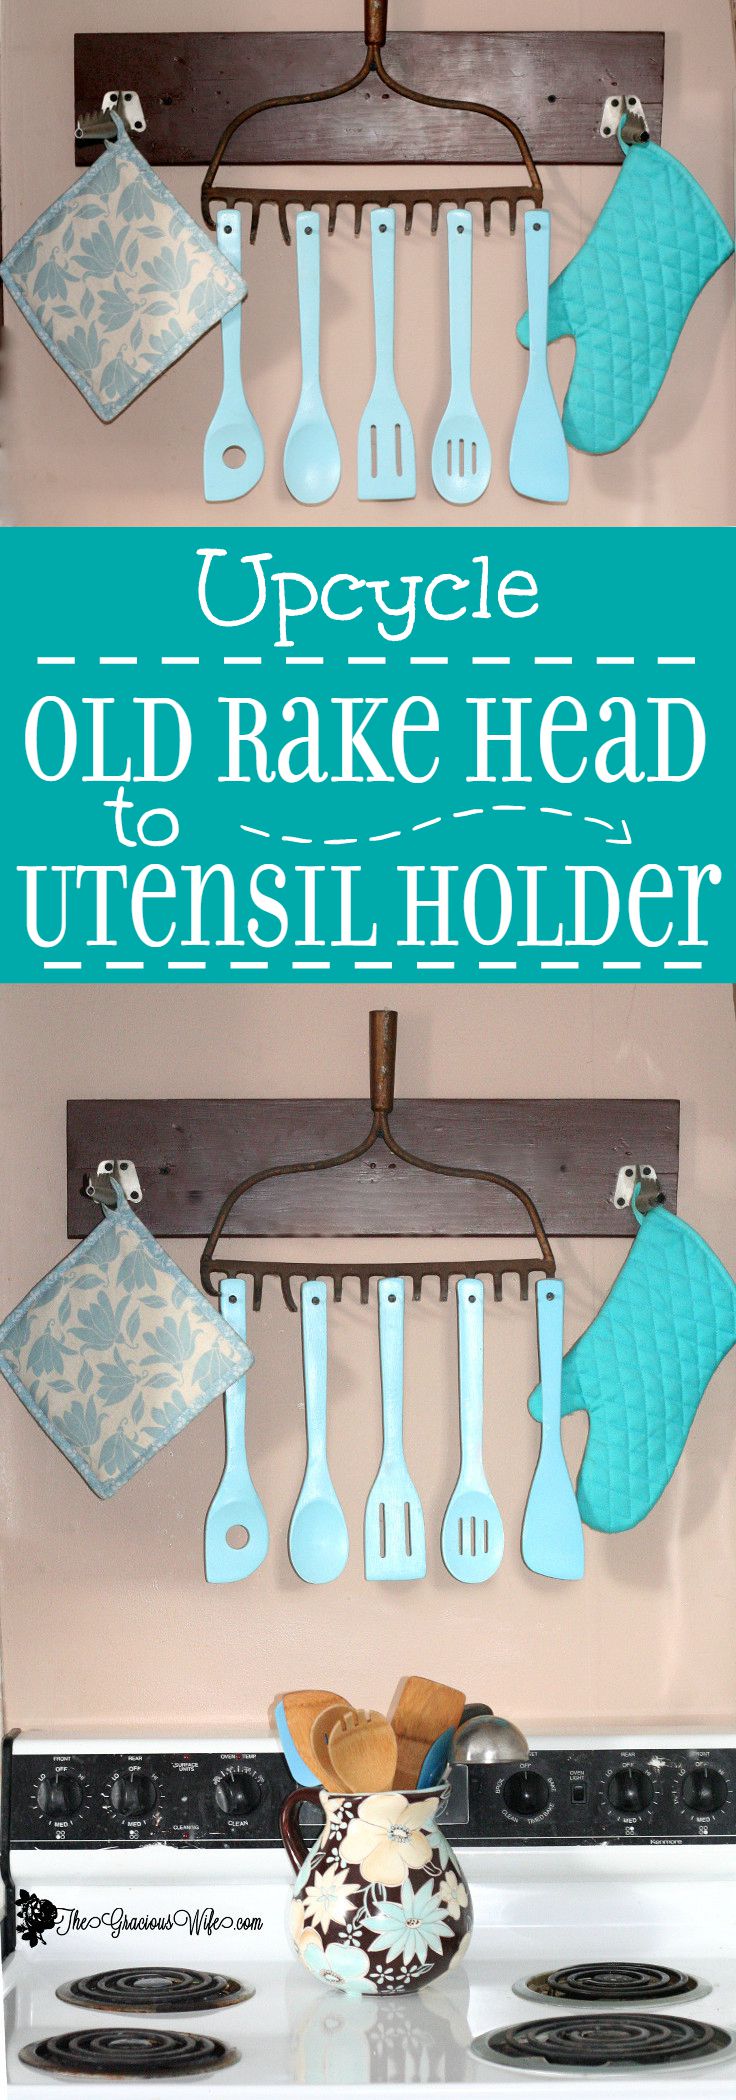 Upcycled Old Rake to Utensil Holder - an easy DIY craft for home decor in the kitchen .  Love these colors!